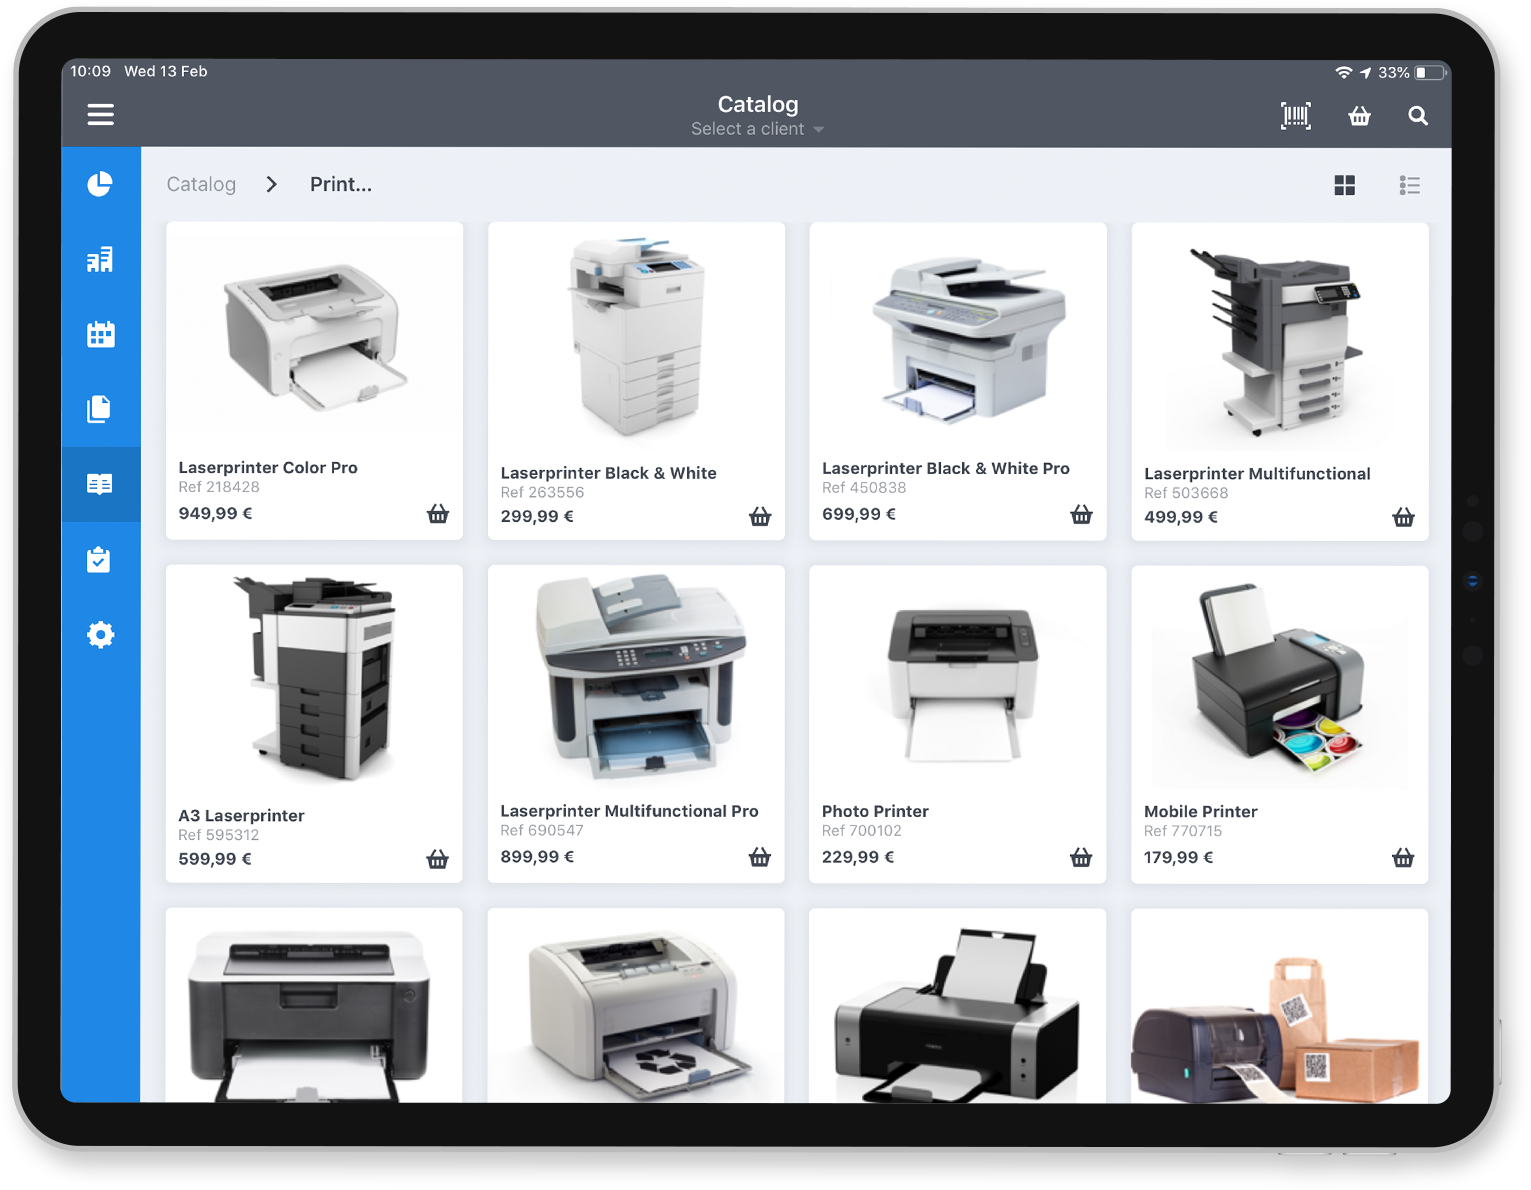 SmartSales Software - Access your product catalog and place orders straight from the app.